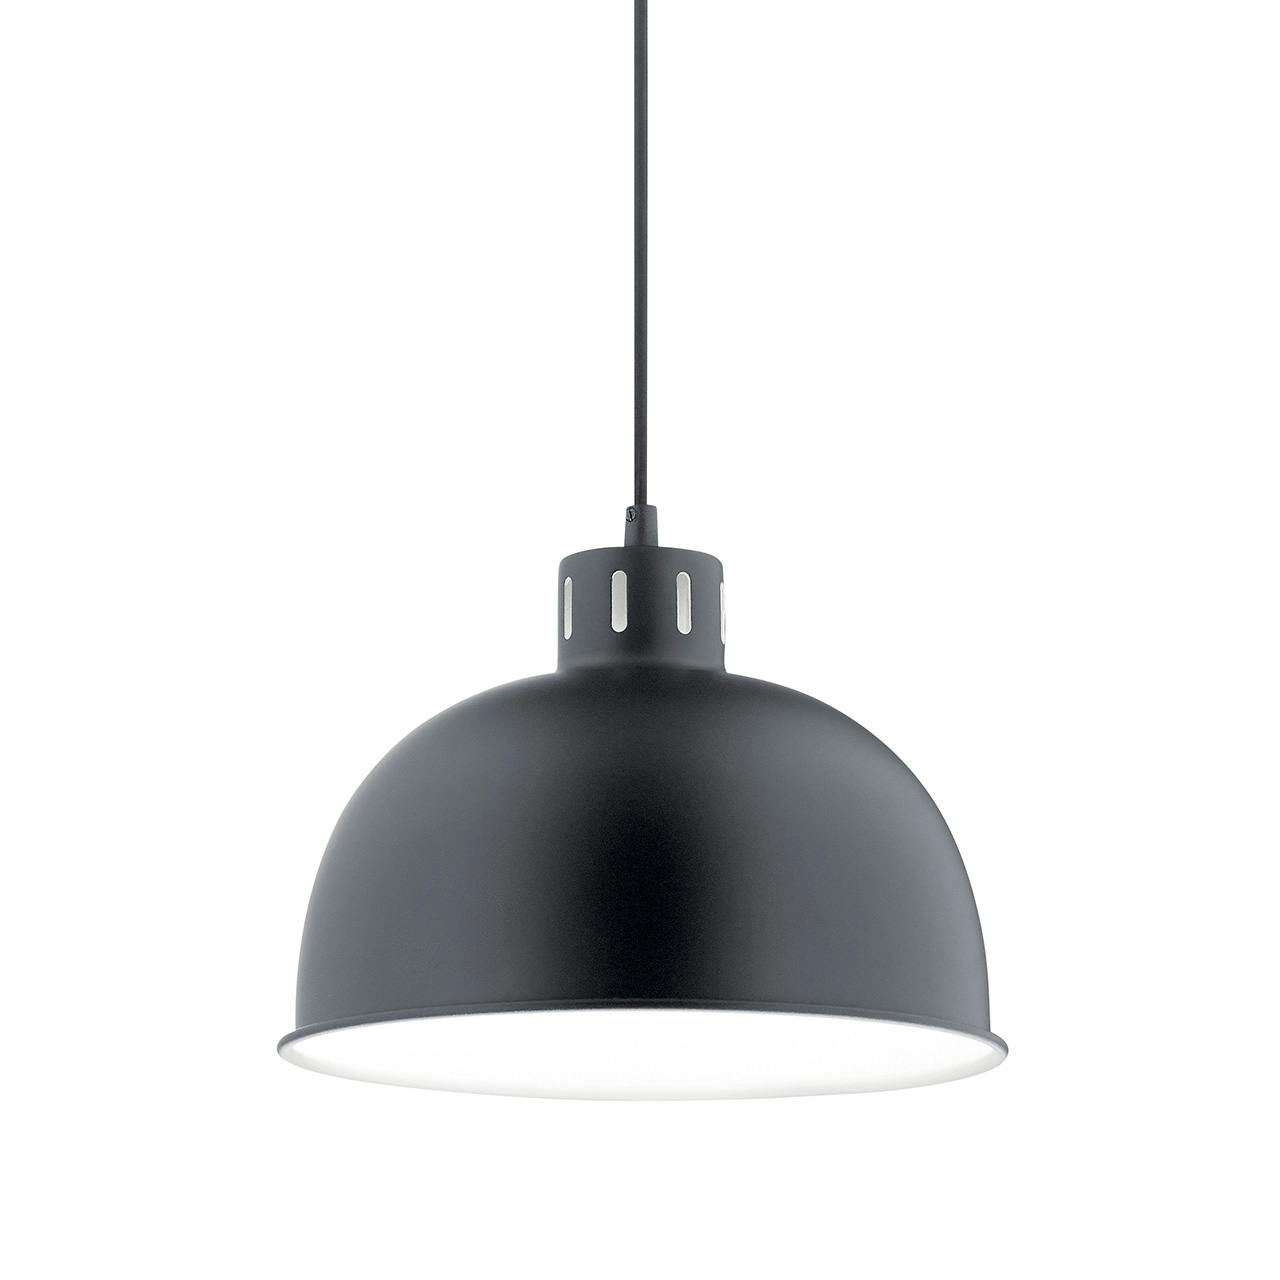 Zailey™ 9" 1 Light Pendant in Black without the canopy on a white background